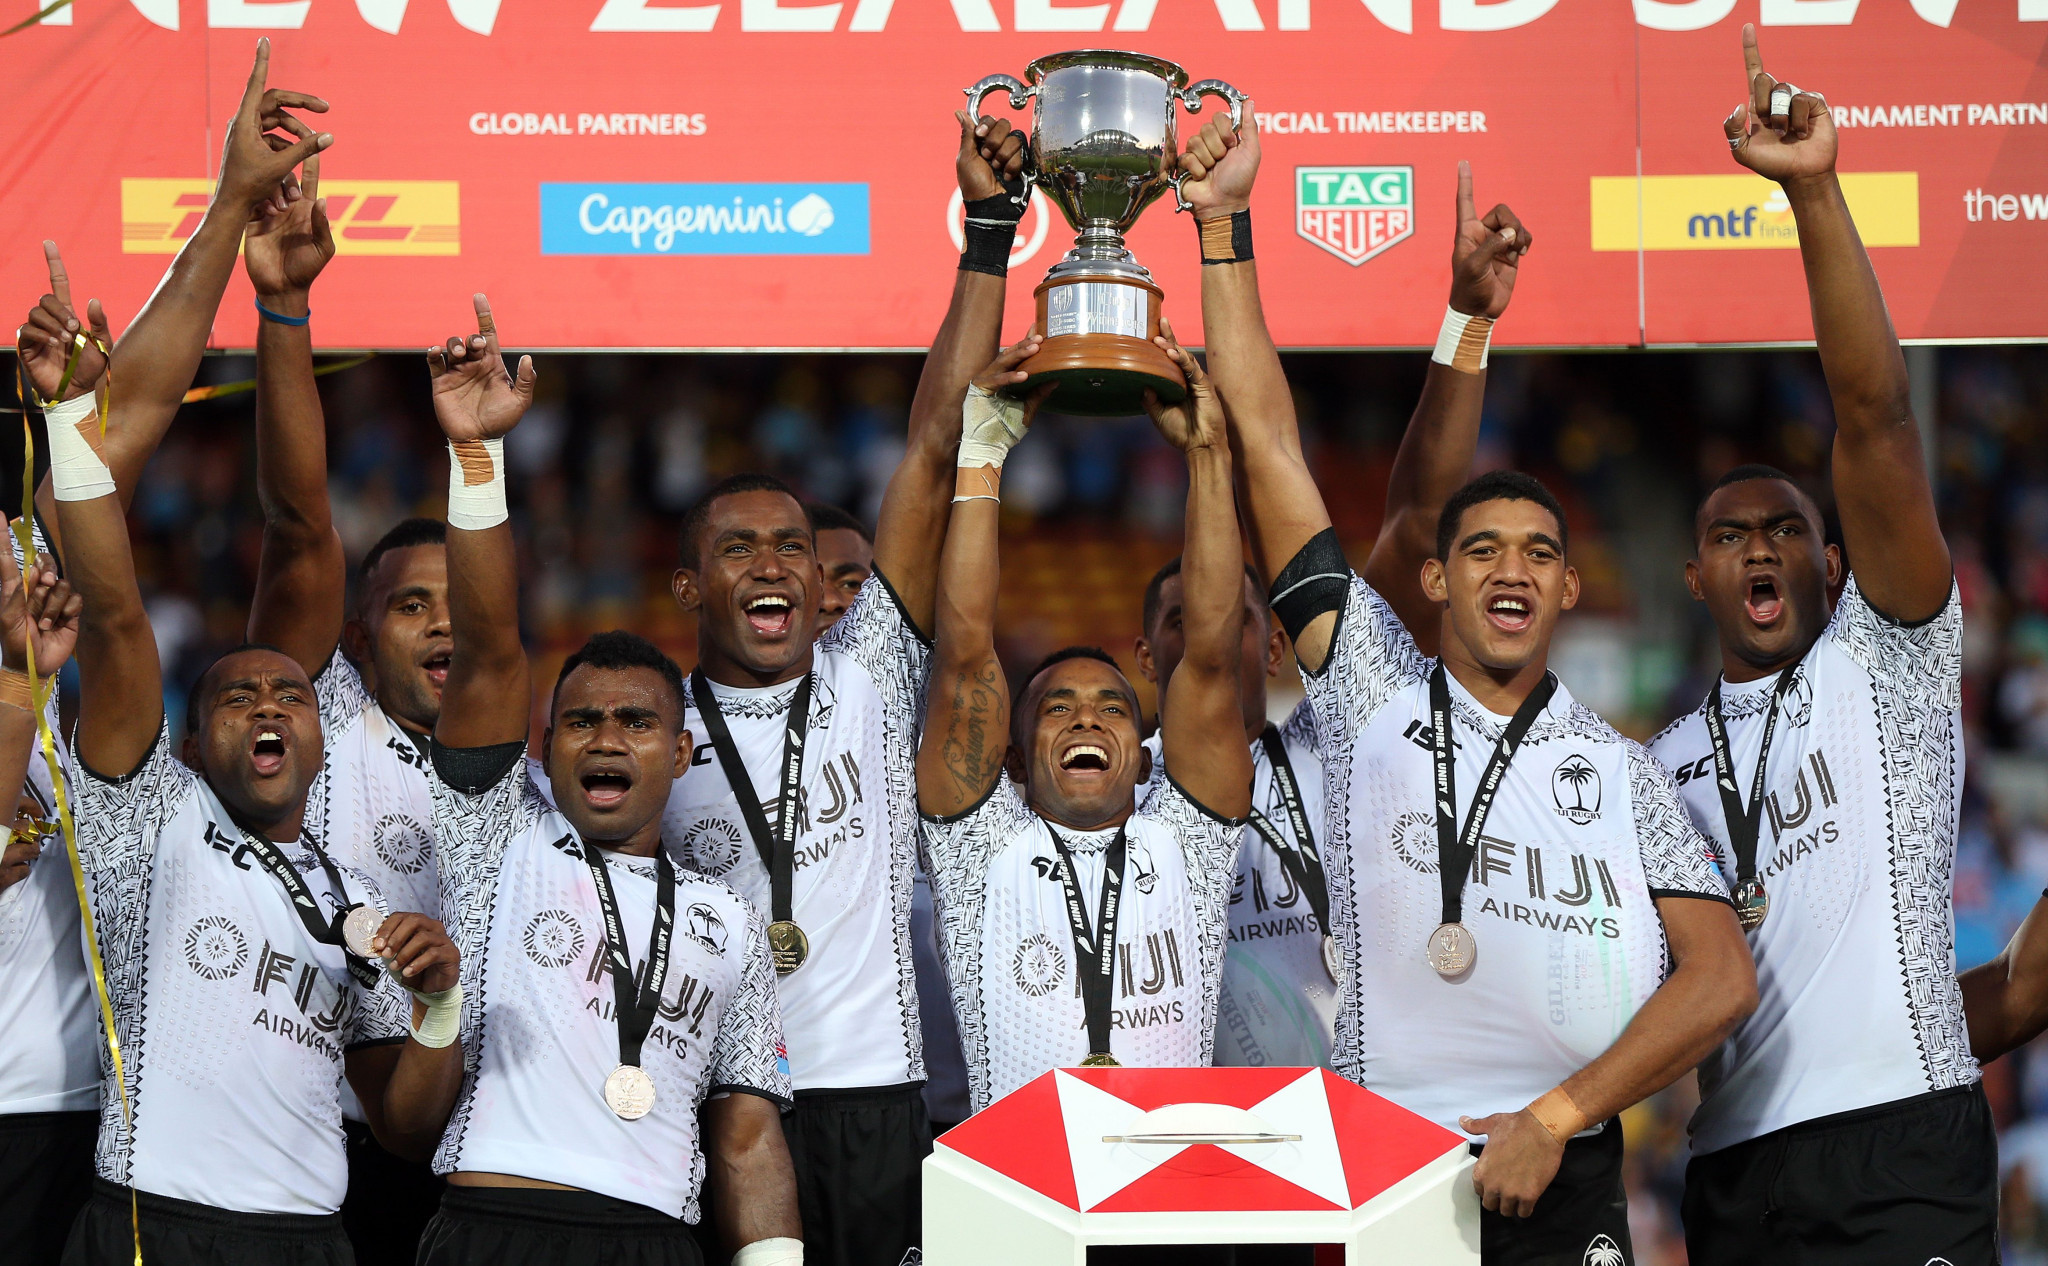 Fiji win World Rugby Seven Series in Hamilton as US finish as runners-up for third consecutive time